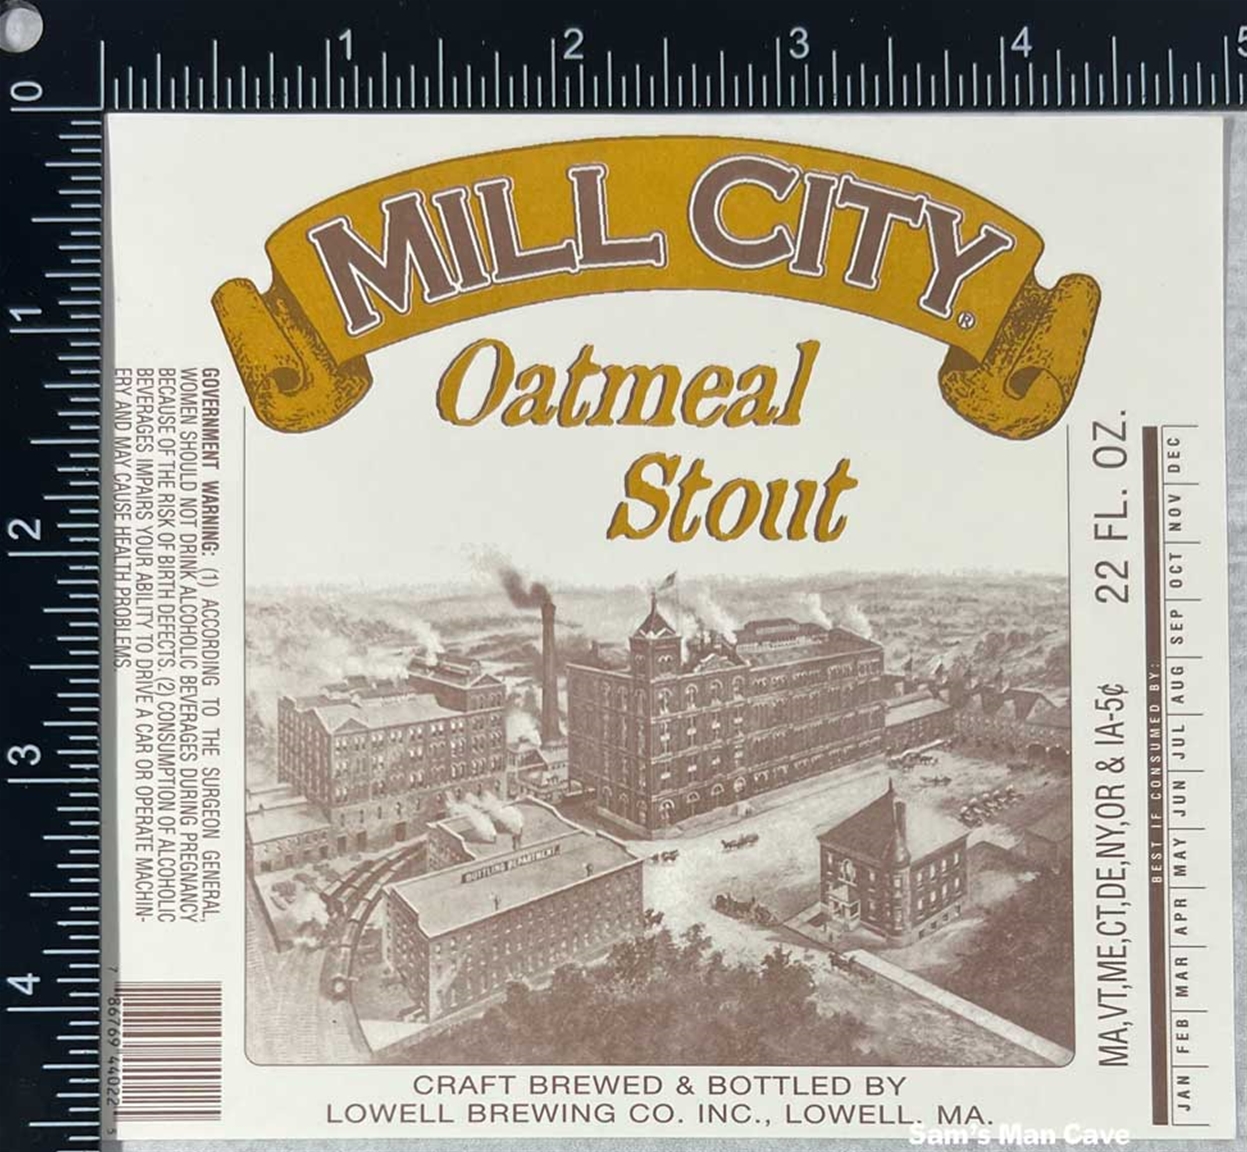 Mill City Oatmeal Stout Label